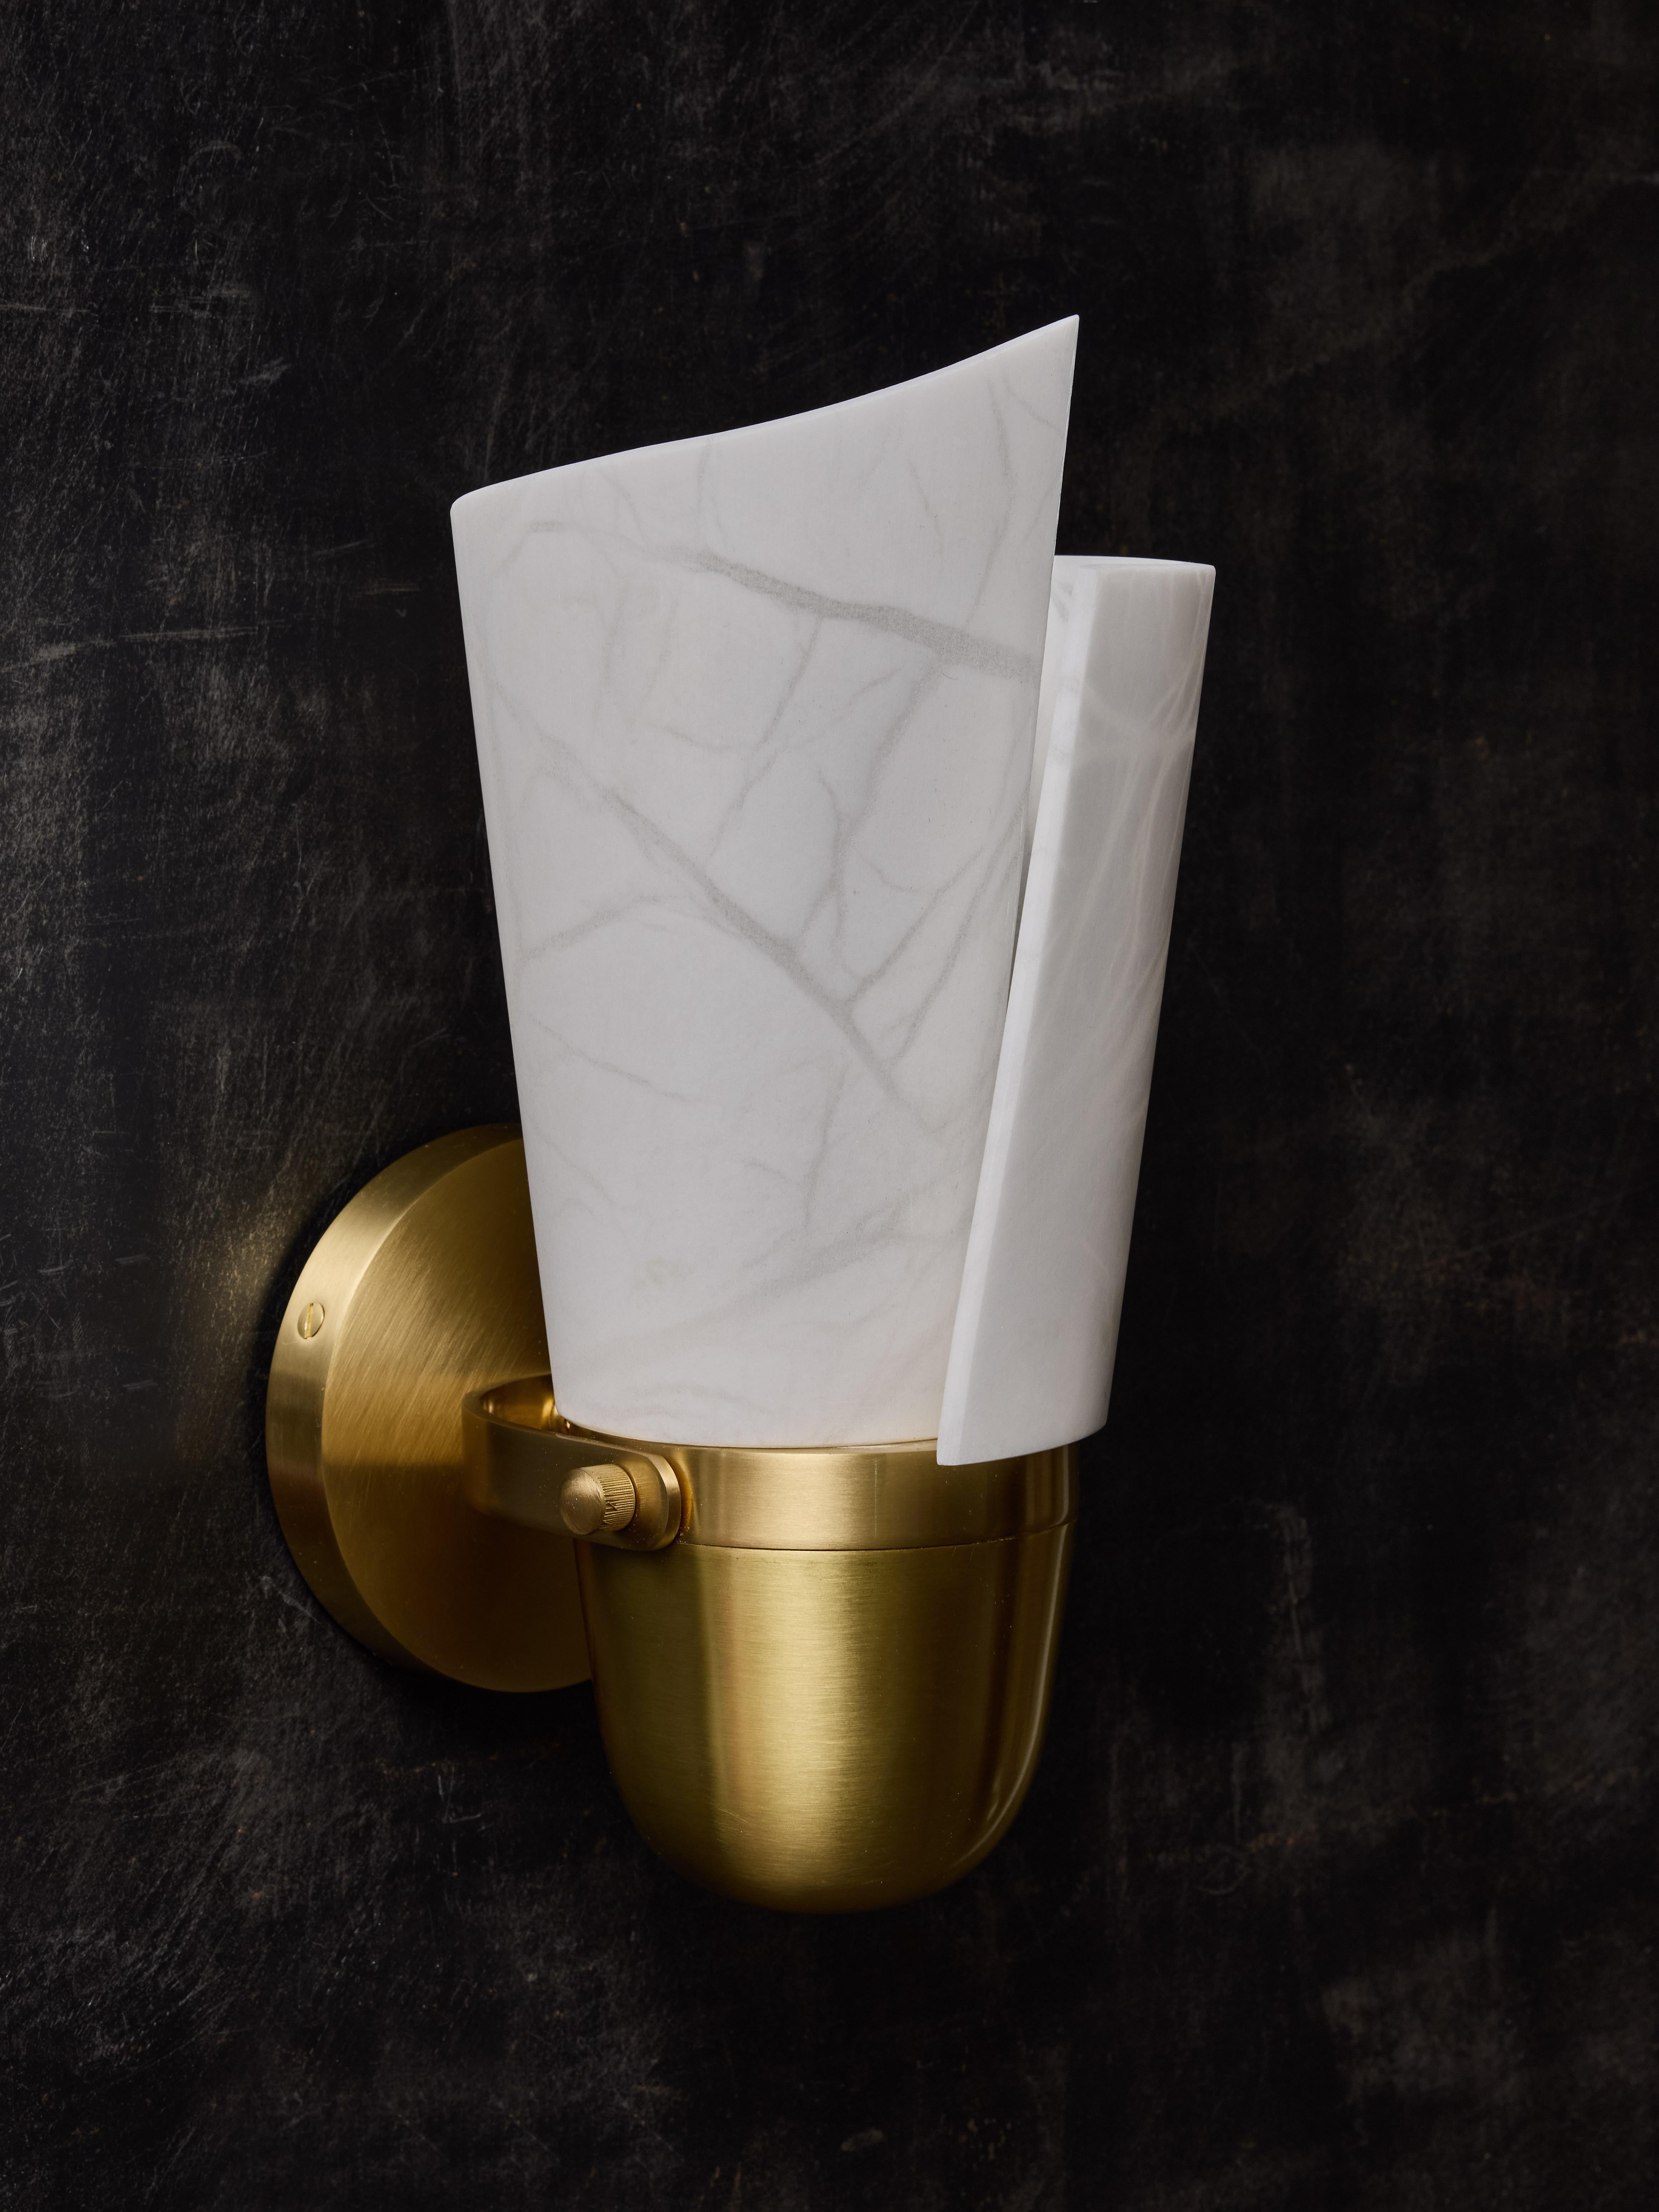 Adjustable satinated brass wall sconces with new spiral shaped alabaster diffuser.